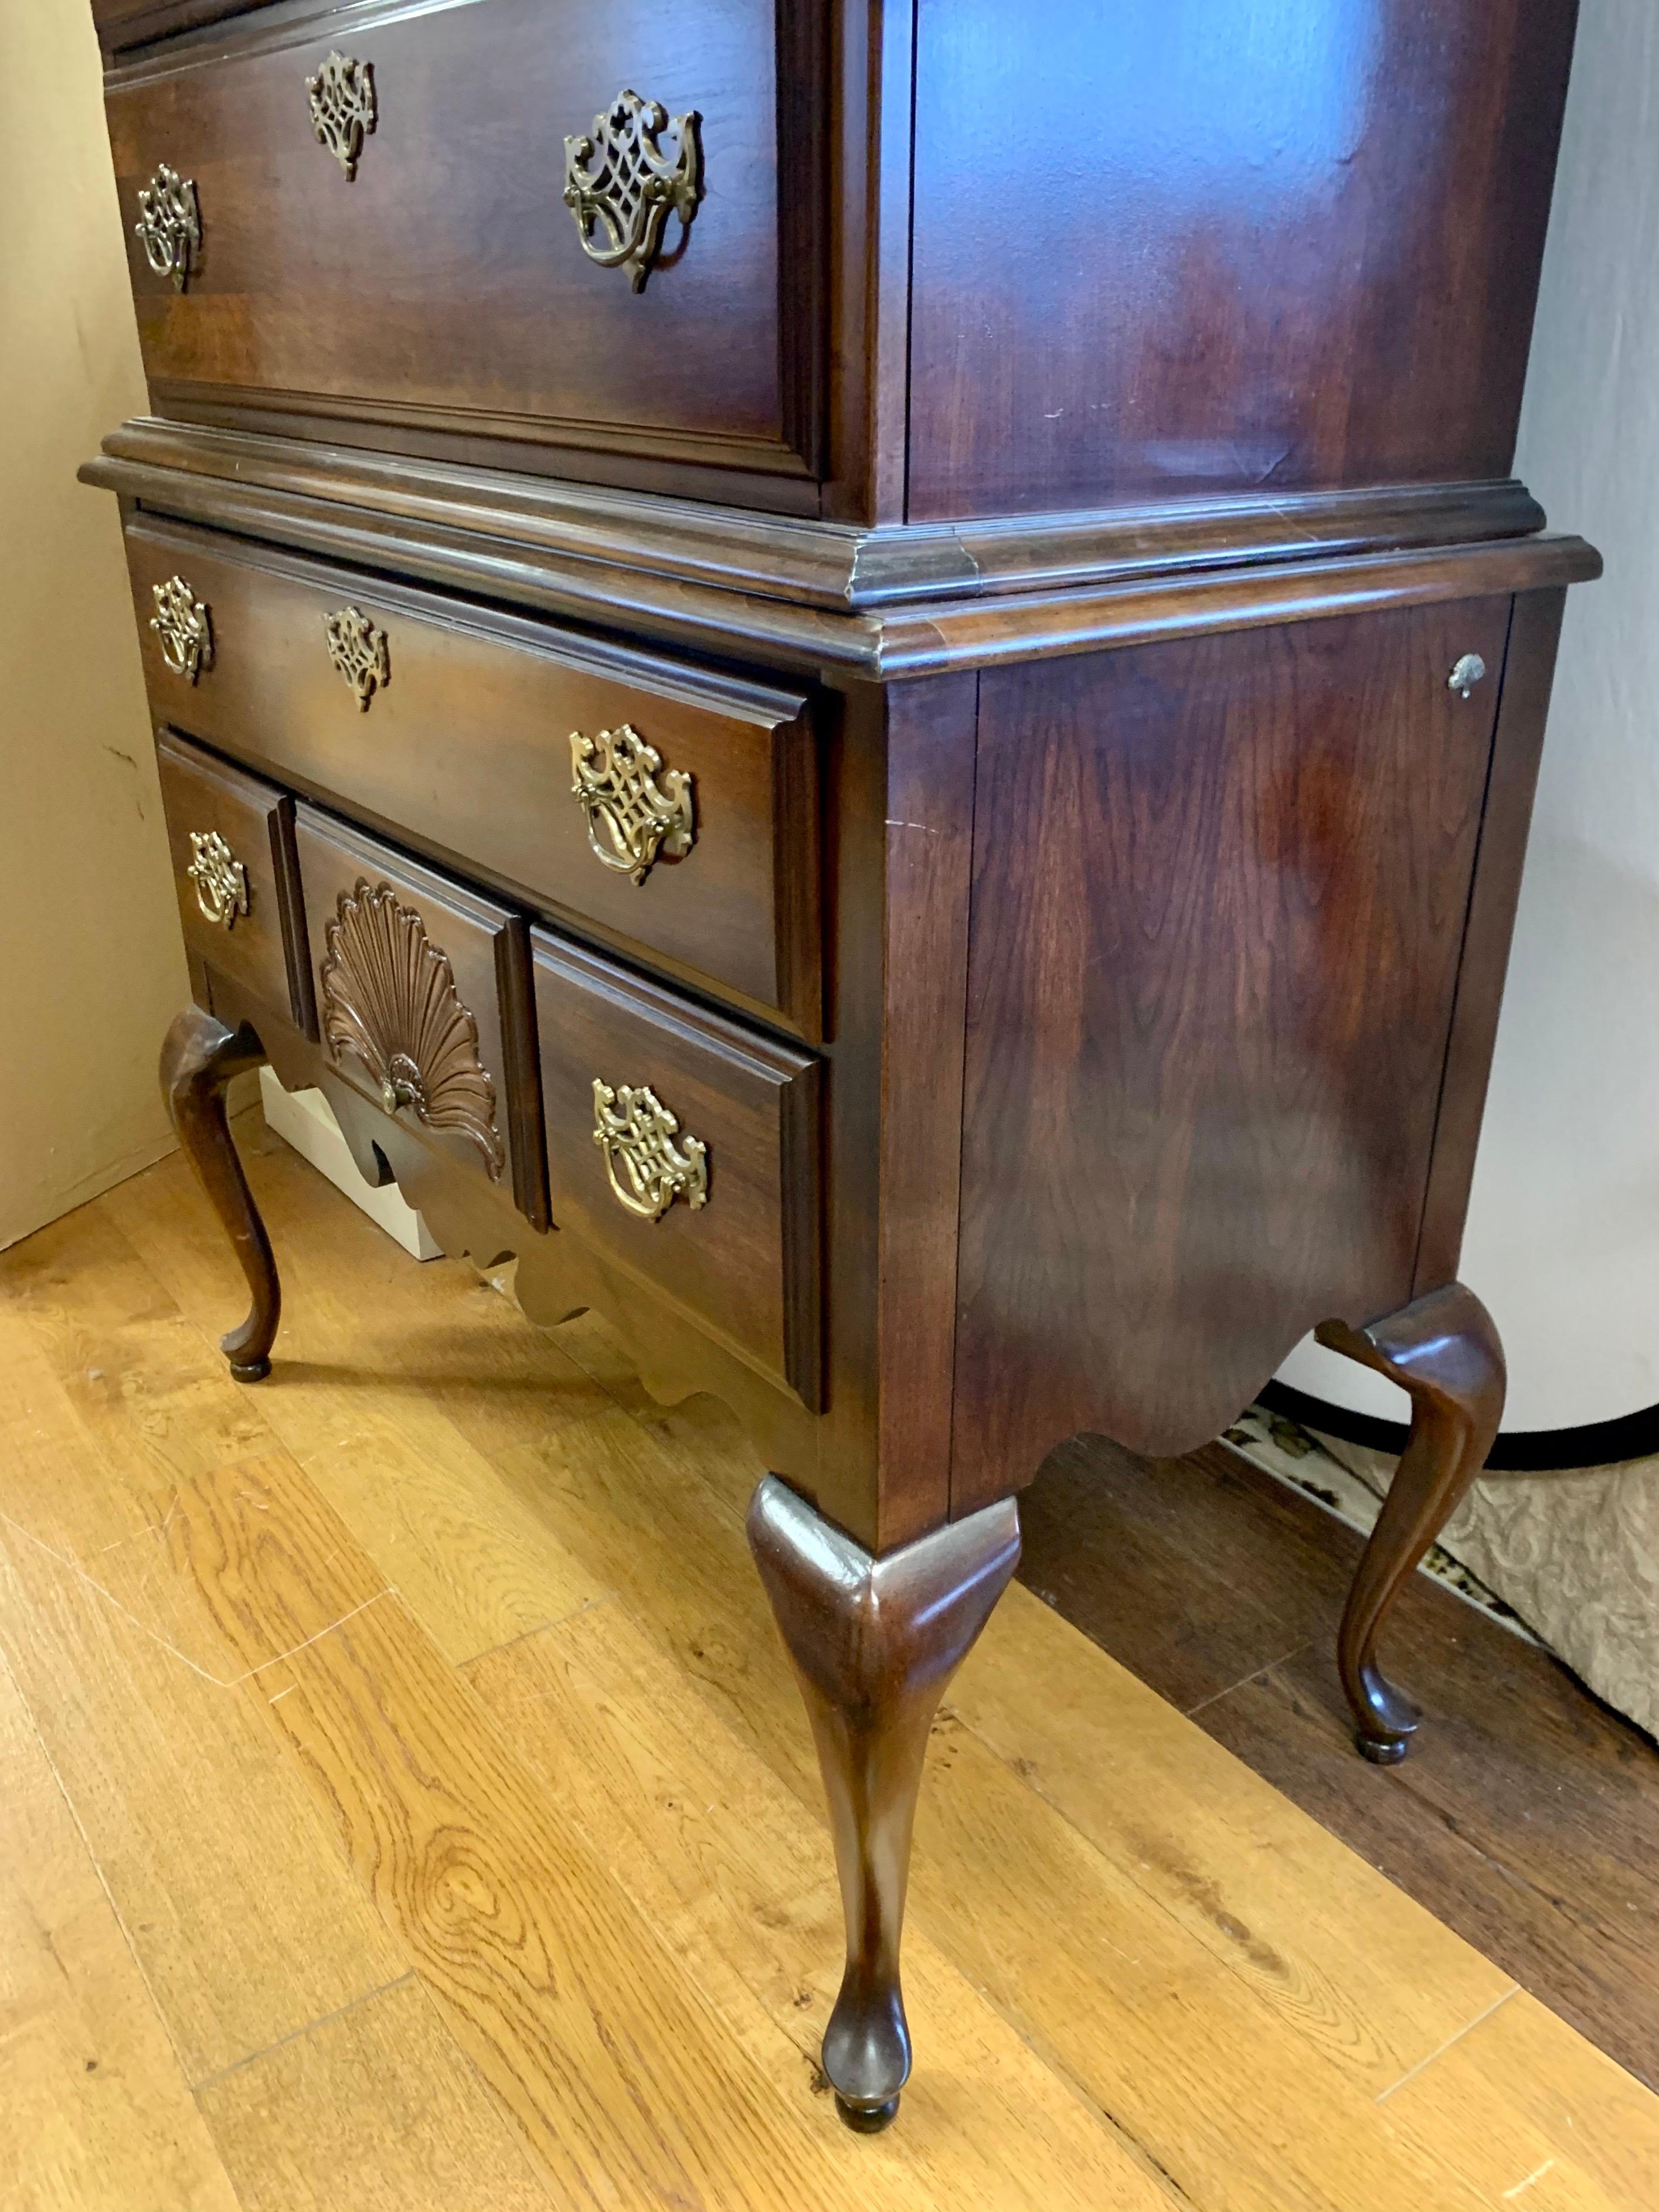 Elegant mahogany wood nine-drawer highboy, circa 1980s. Comes in two pieces, a top and a bottom.
All drawers open and close smoothly.